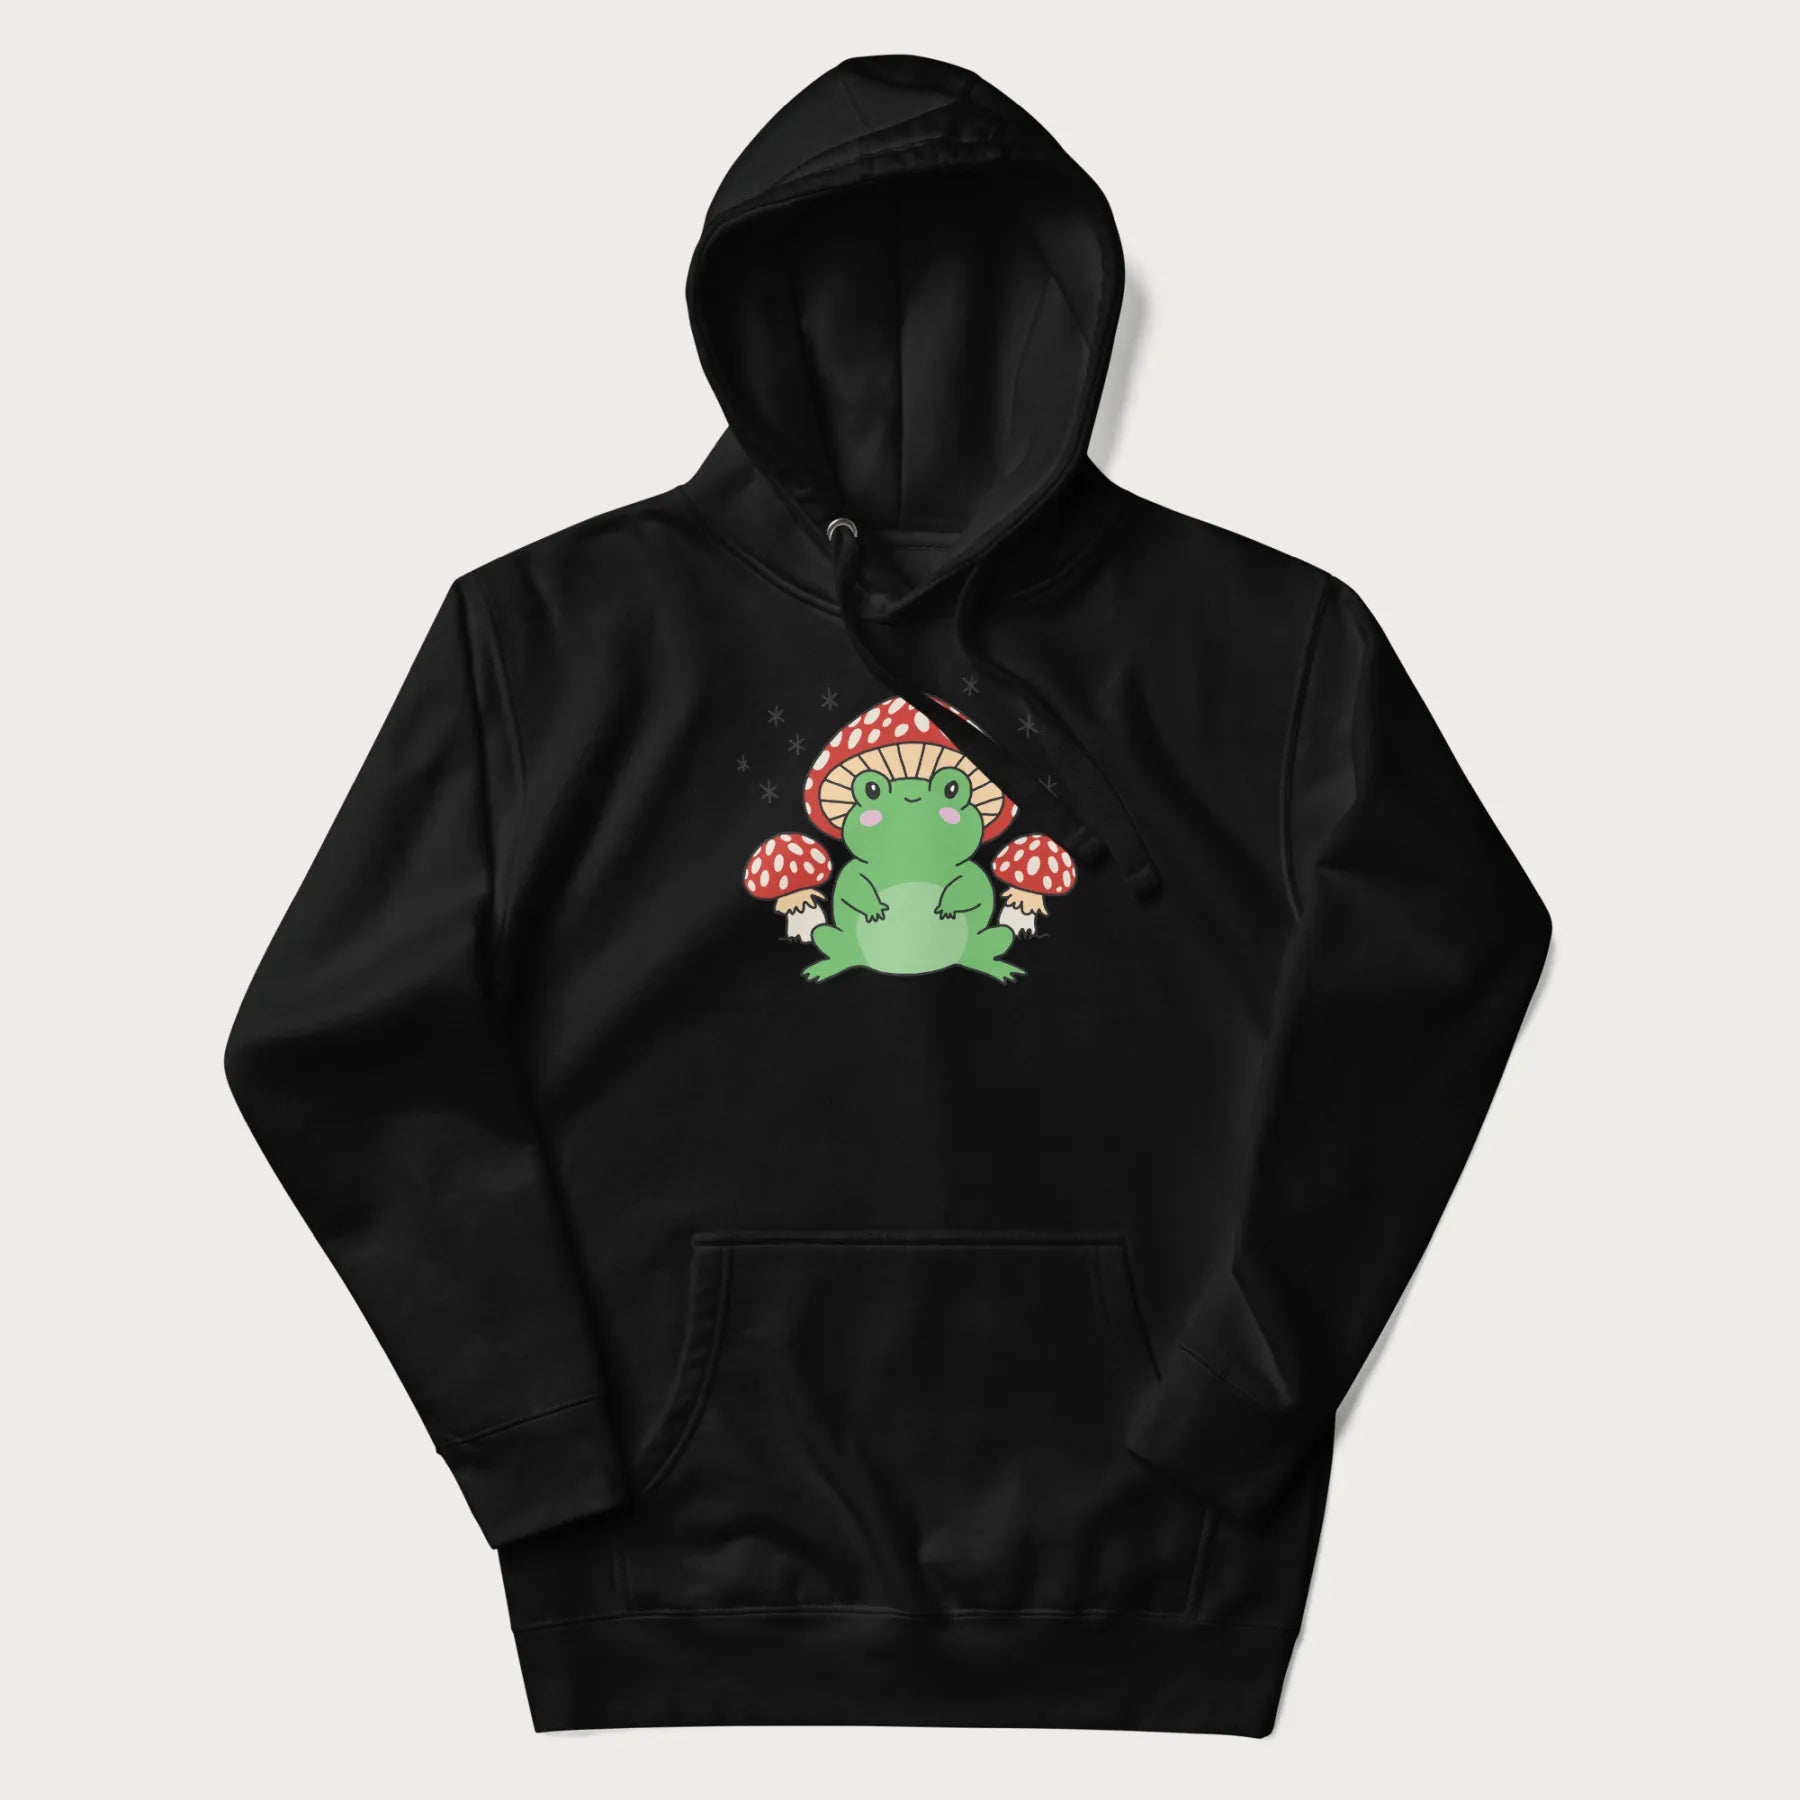 Folded black hoodie will illustration of a cute green frog with red and white mushrooms.